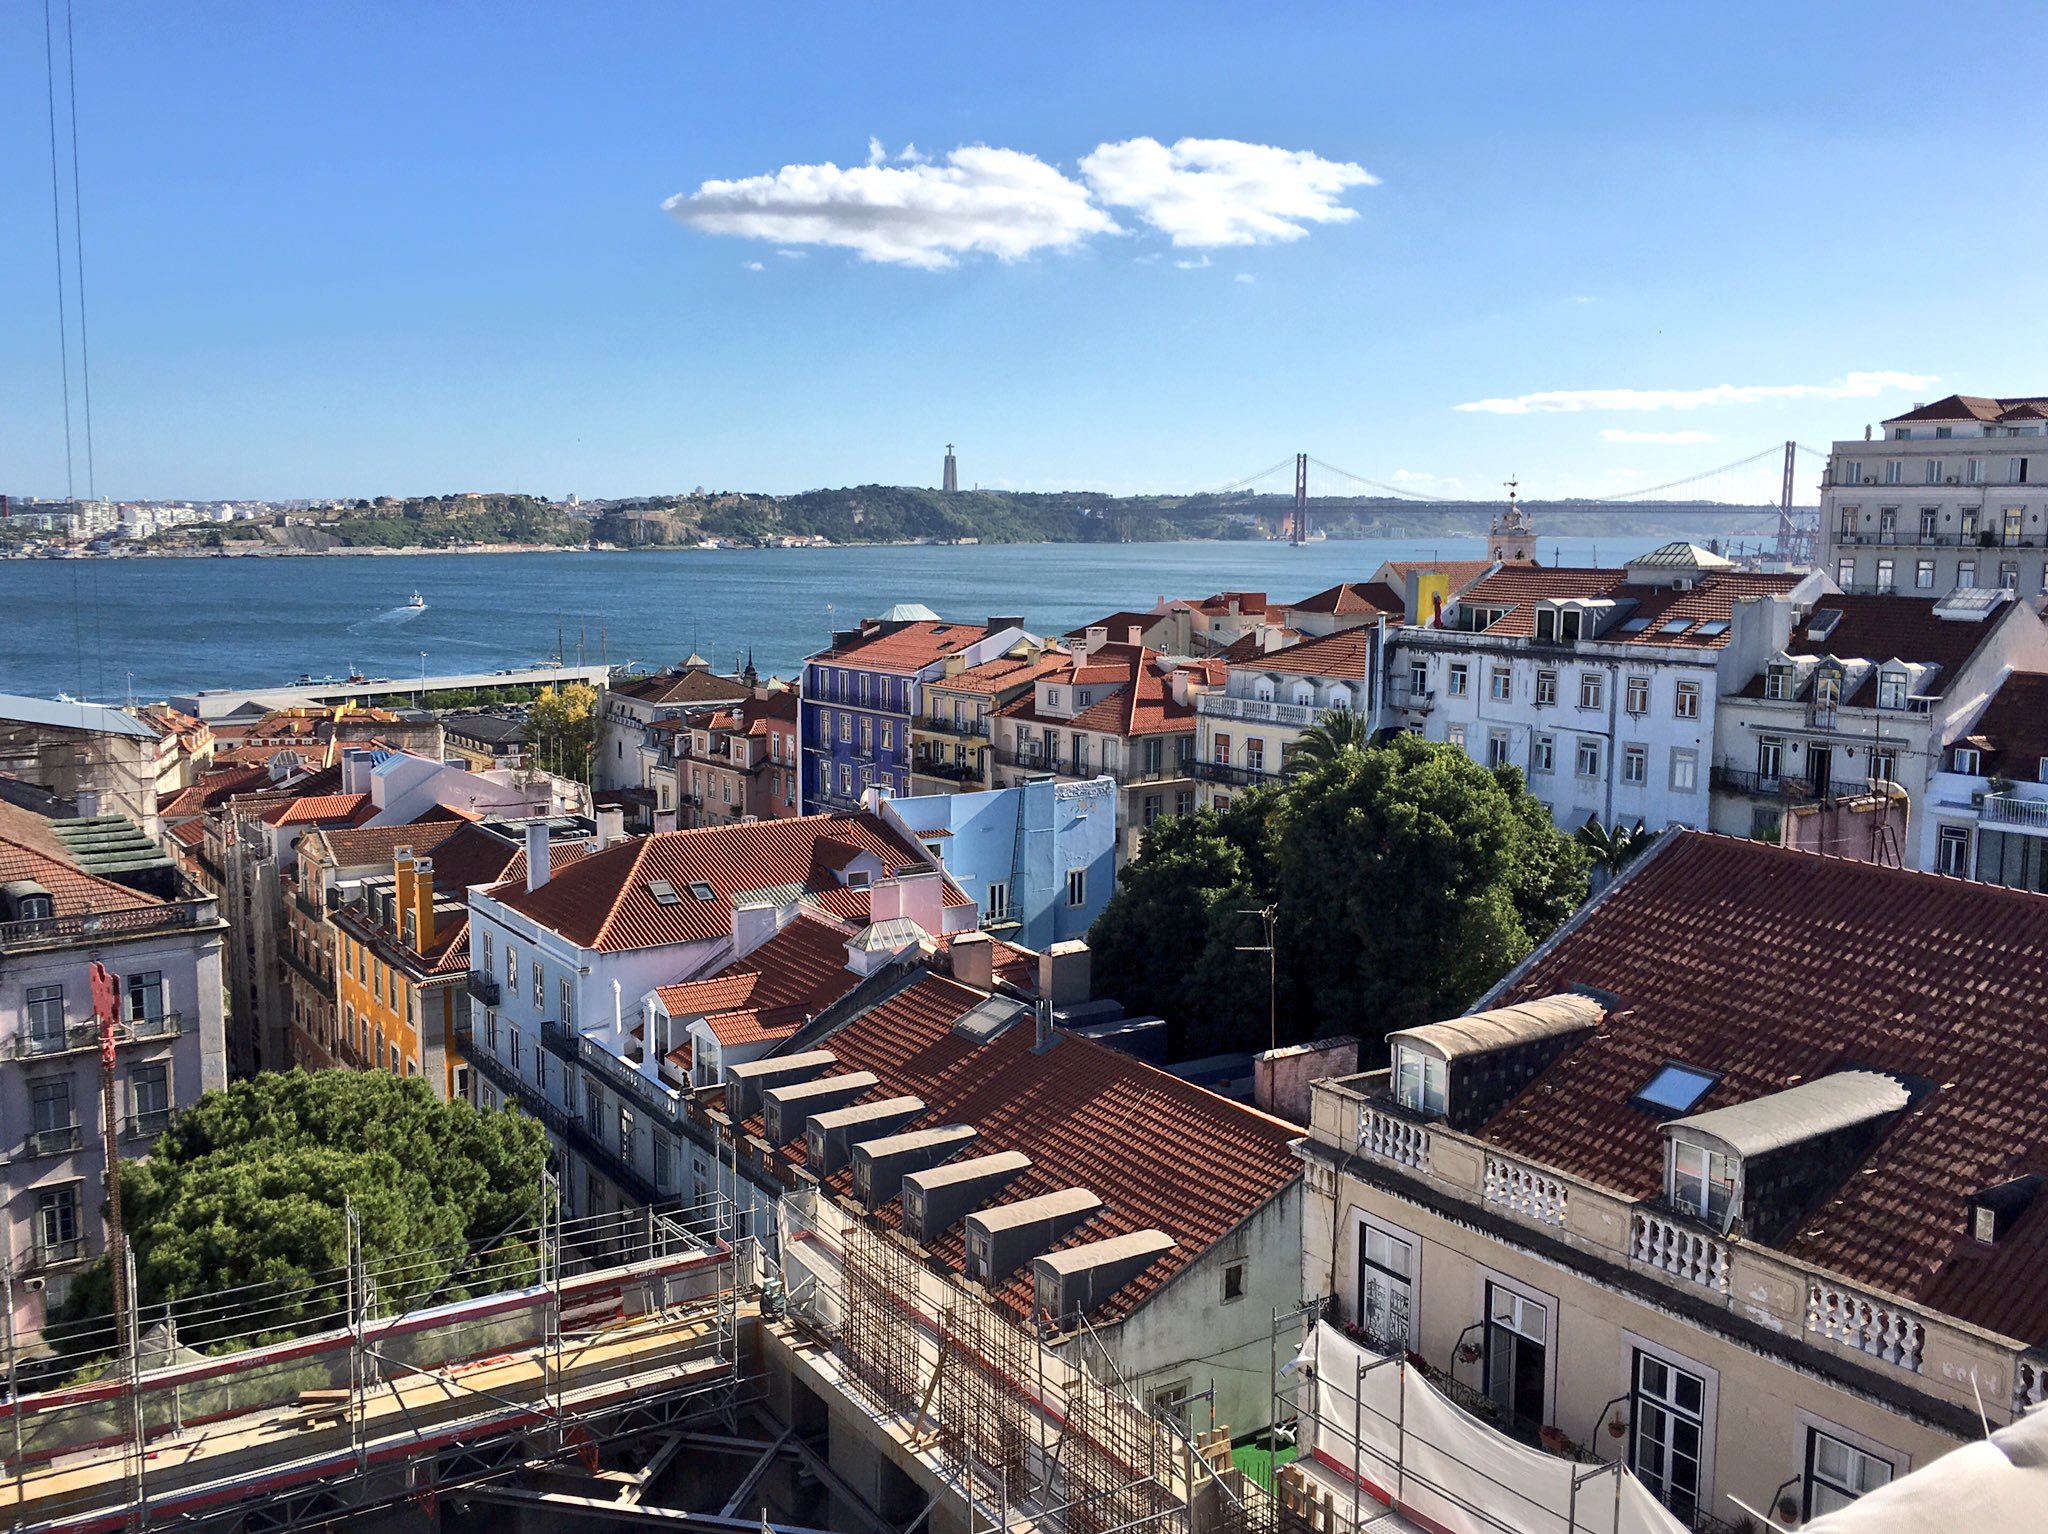 Lisbon: for when you want both Cristo Redentor and the Golden Gate Bridge in the same city. https://t.co/ZpTwpWg2vZ